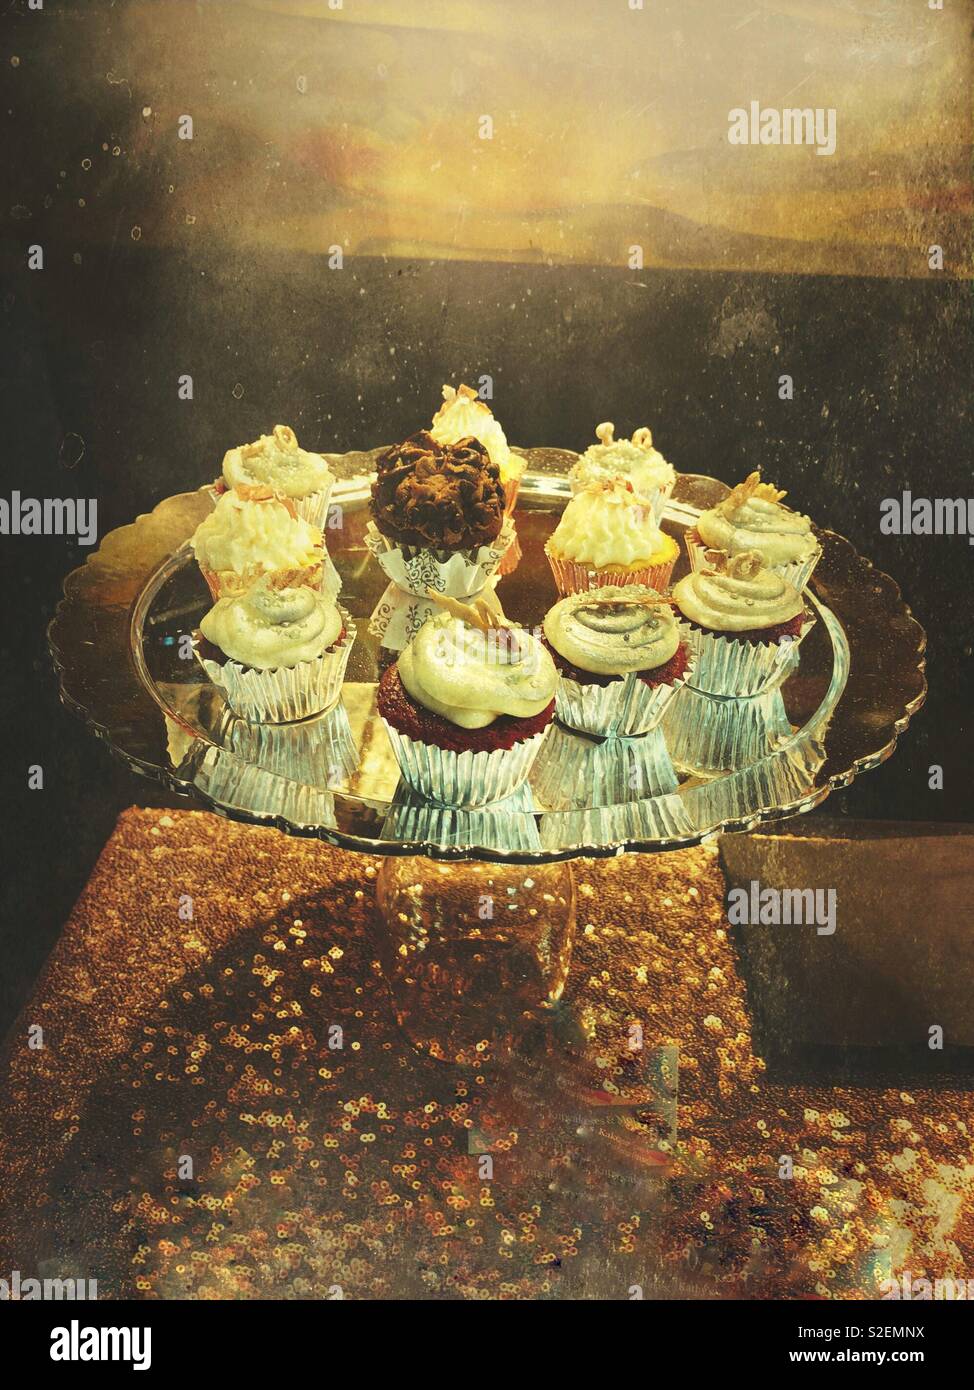 Cupcakes on a sparkling table. Stock Photo